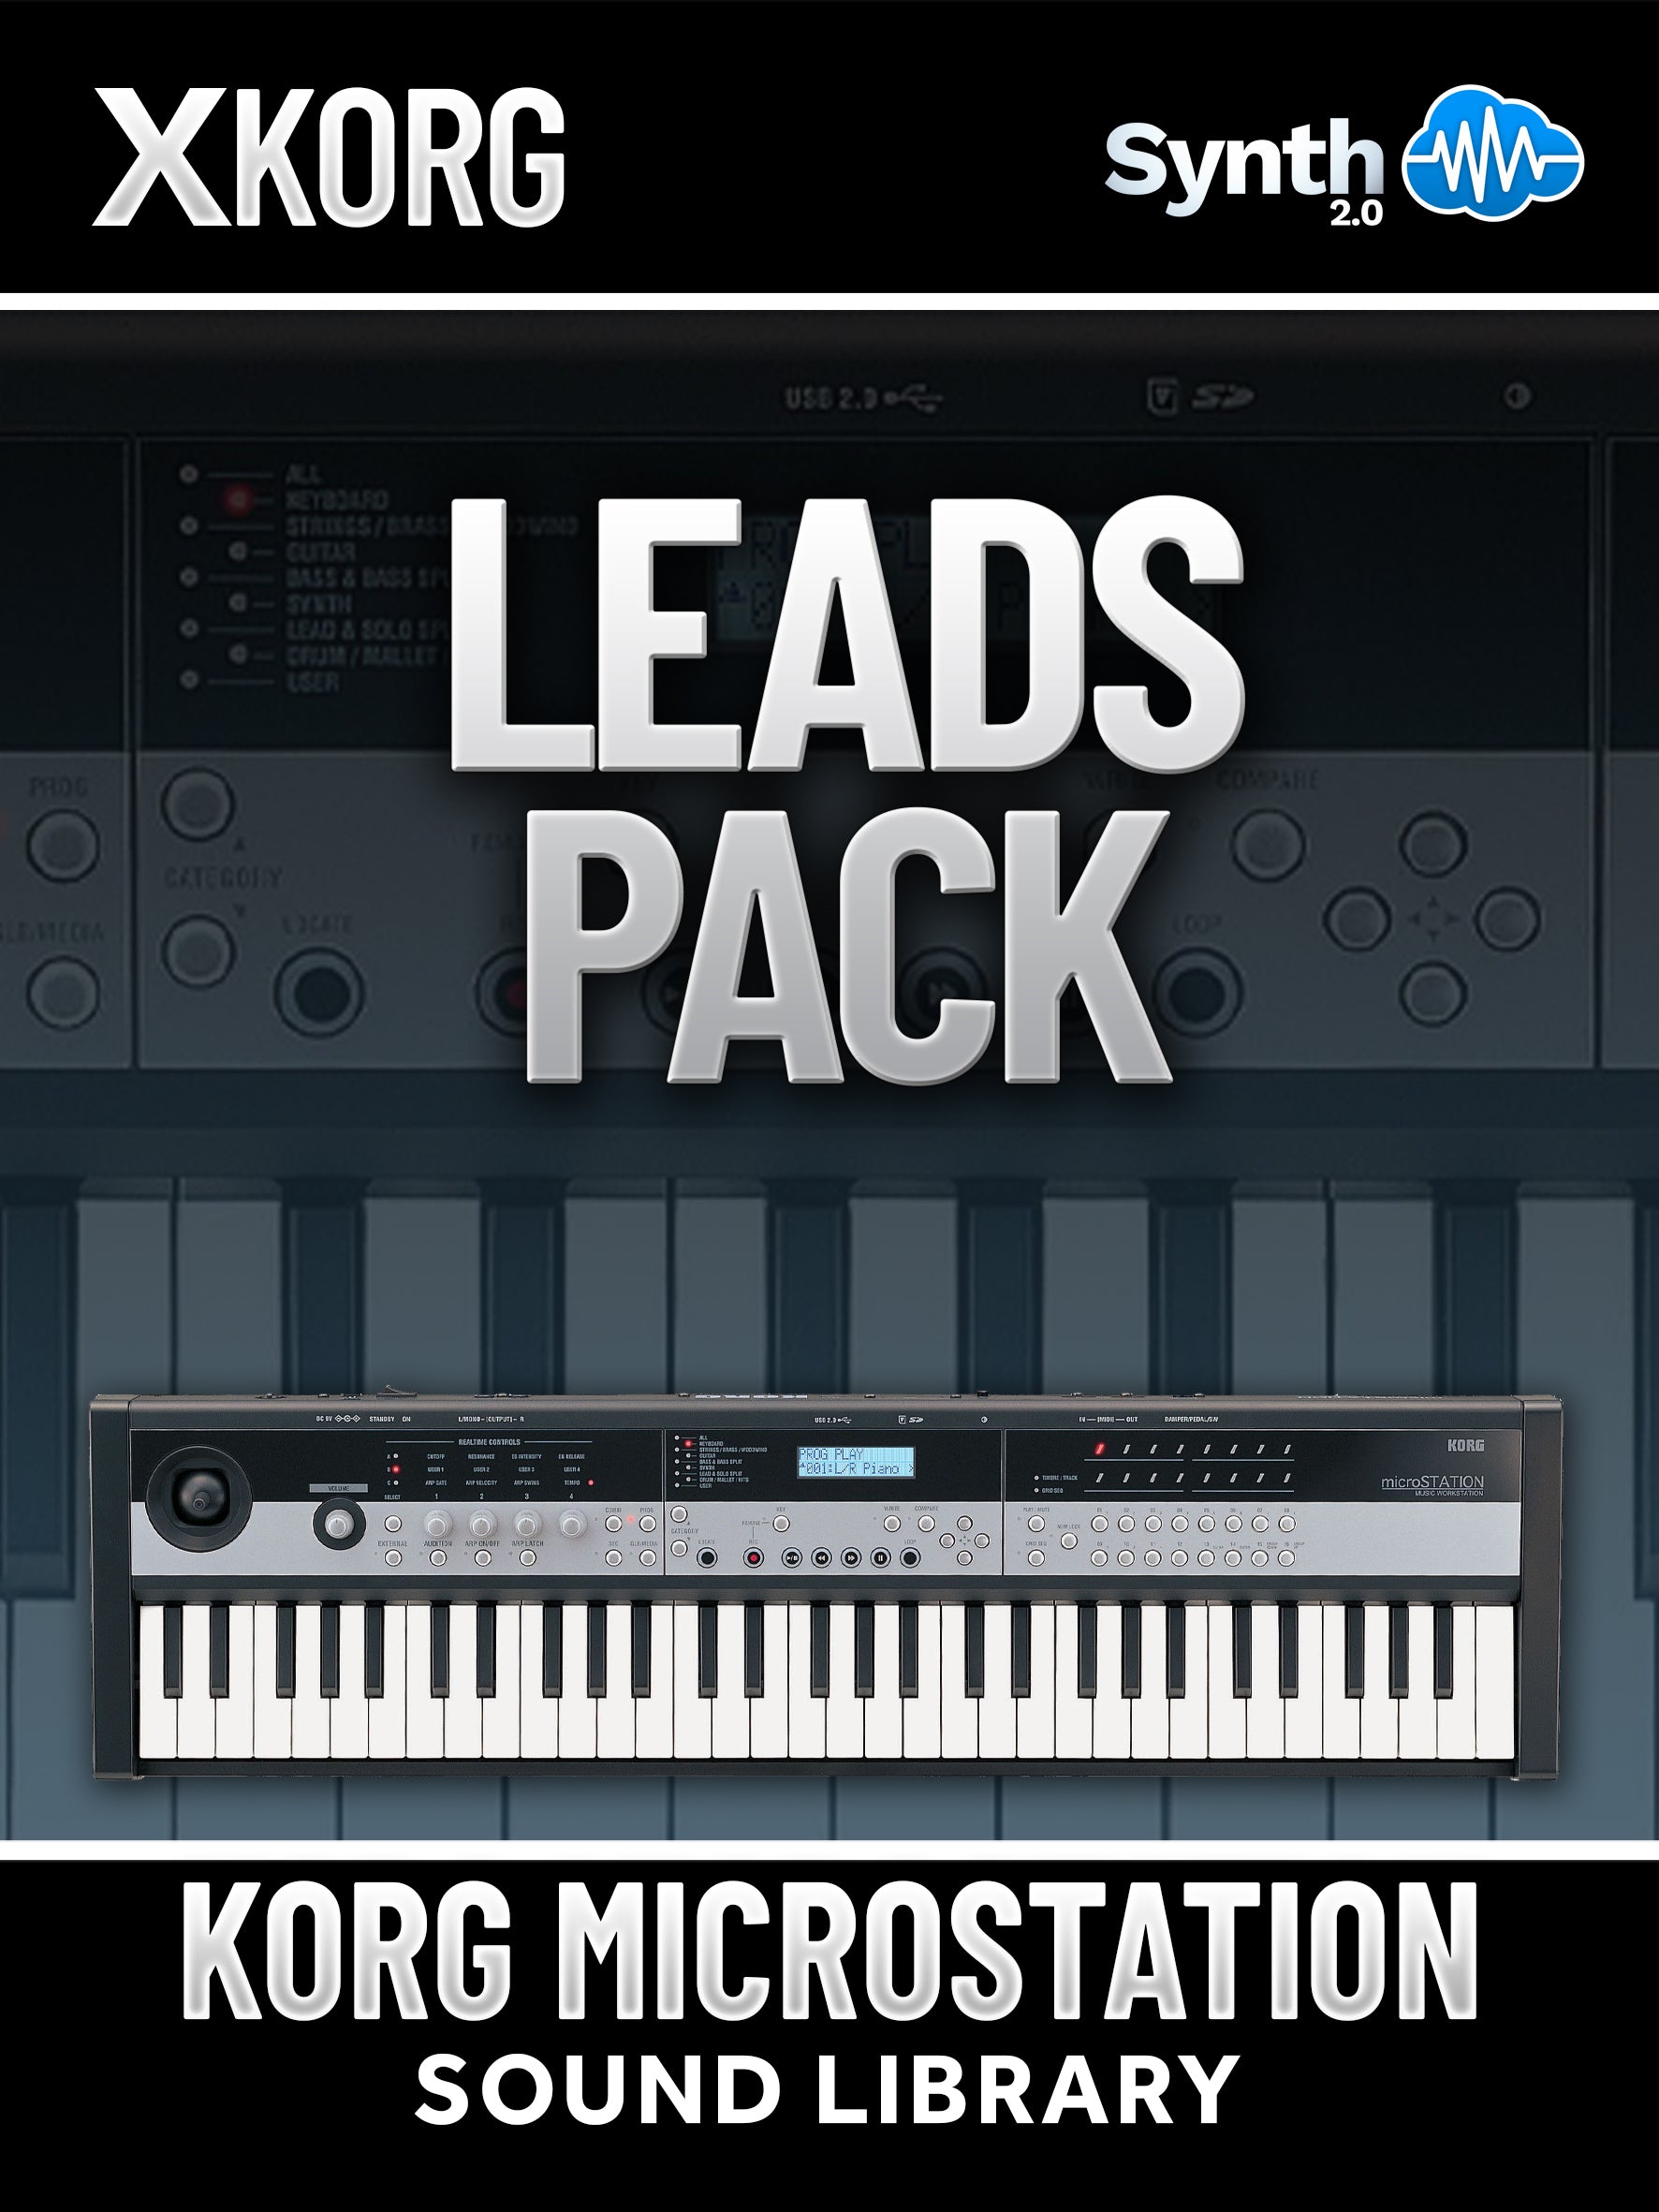 SCL078 - ( Bundle ) - Leads Pack + PF Cover Pack MKI - Korg Microstation ( 21 presets )